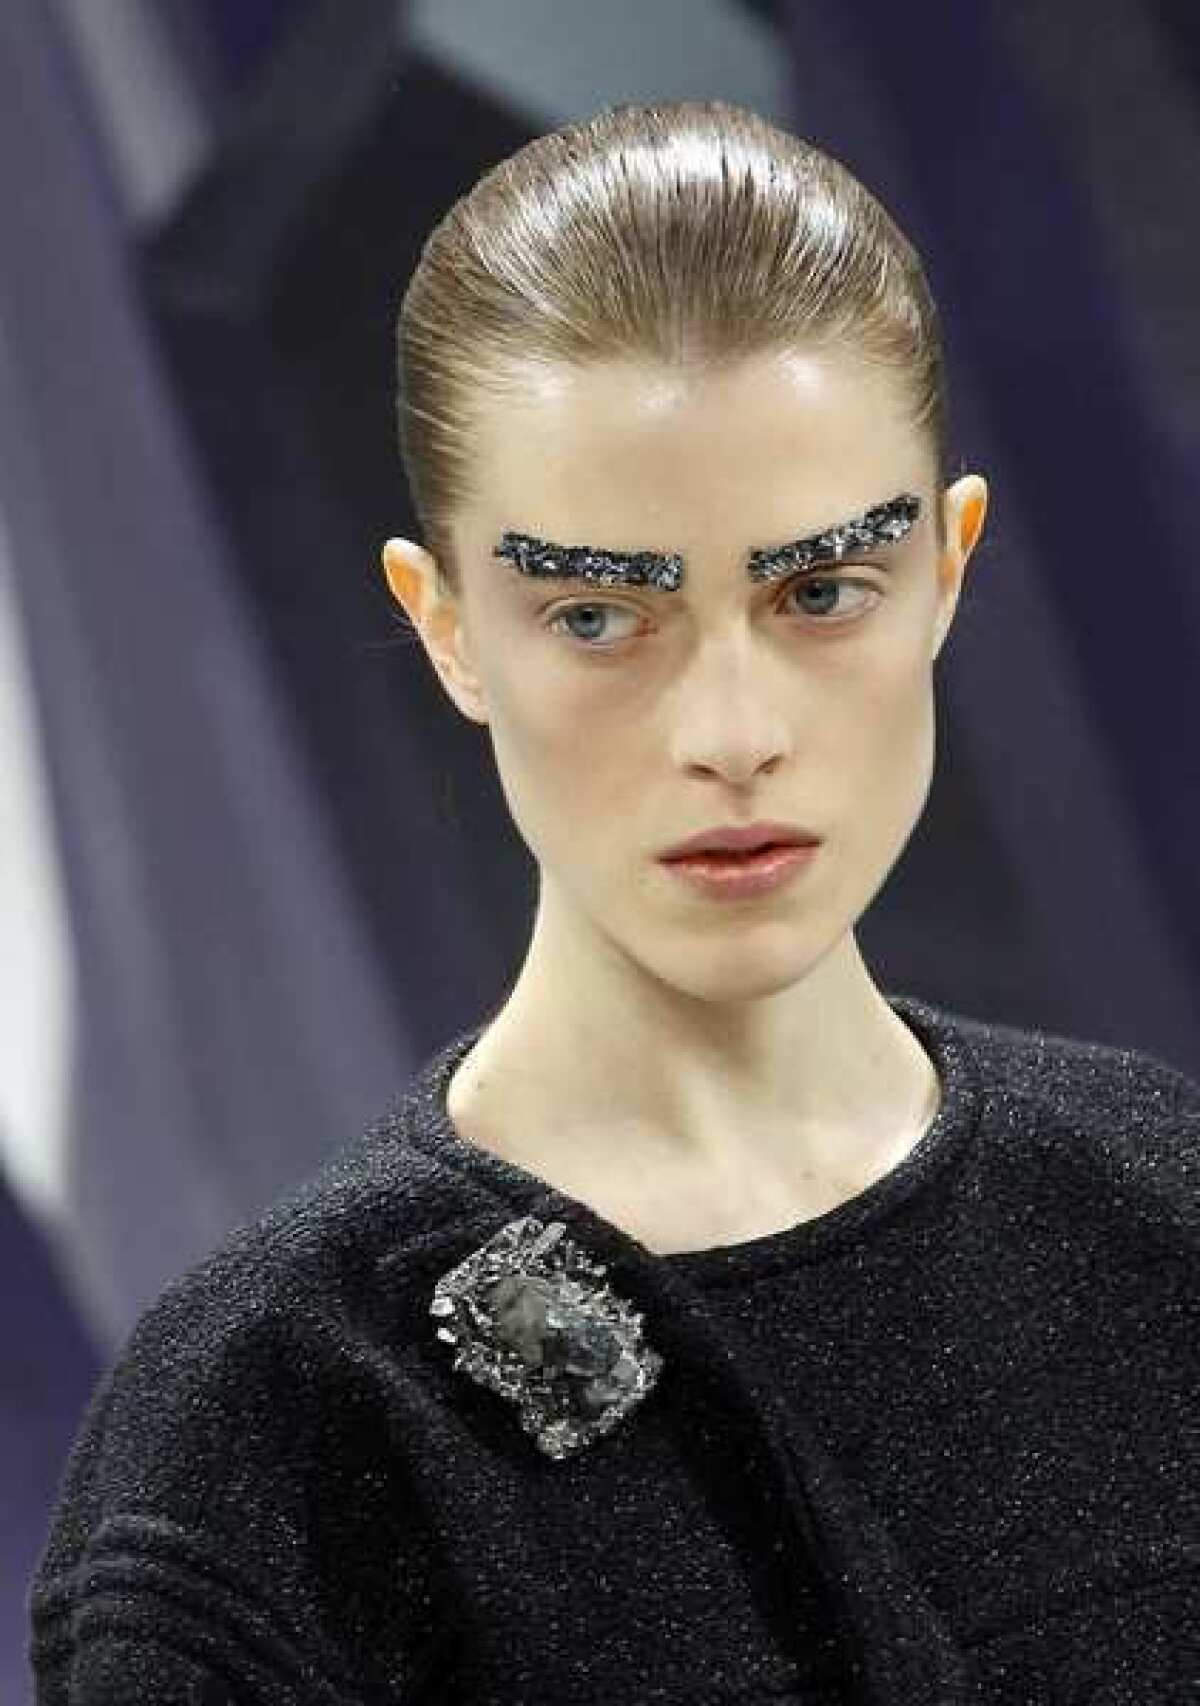 A model with bejeweled brows in a look from Chanel during Paris Fashion Week.